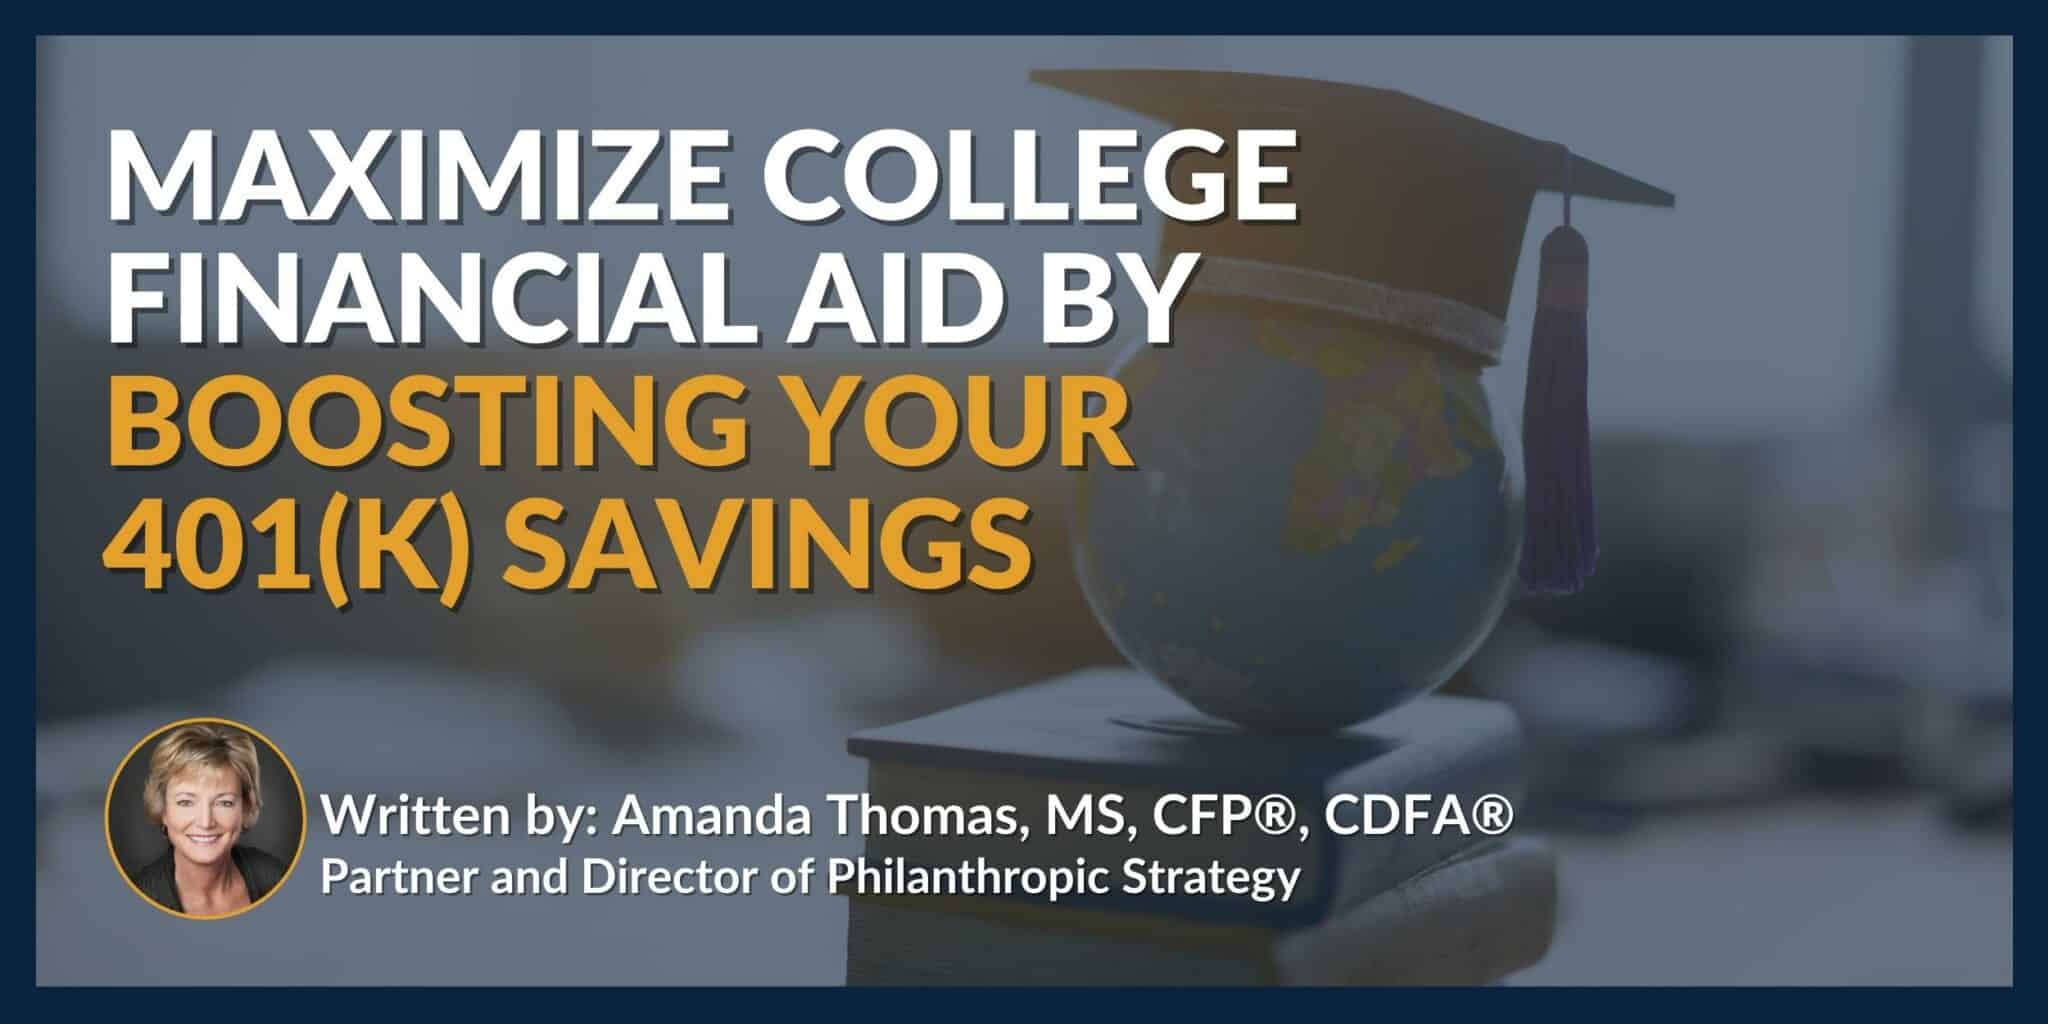 Maximize College Financial Aid by Boosting Your 401(k) Savings